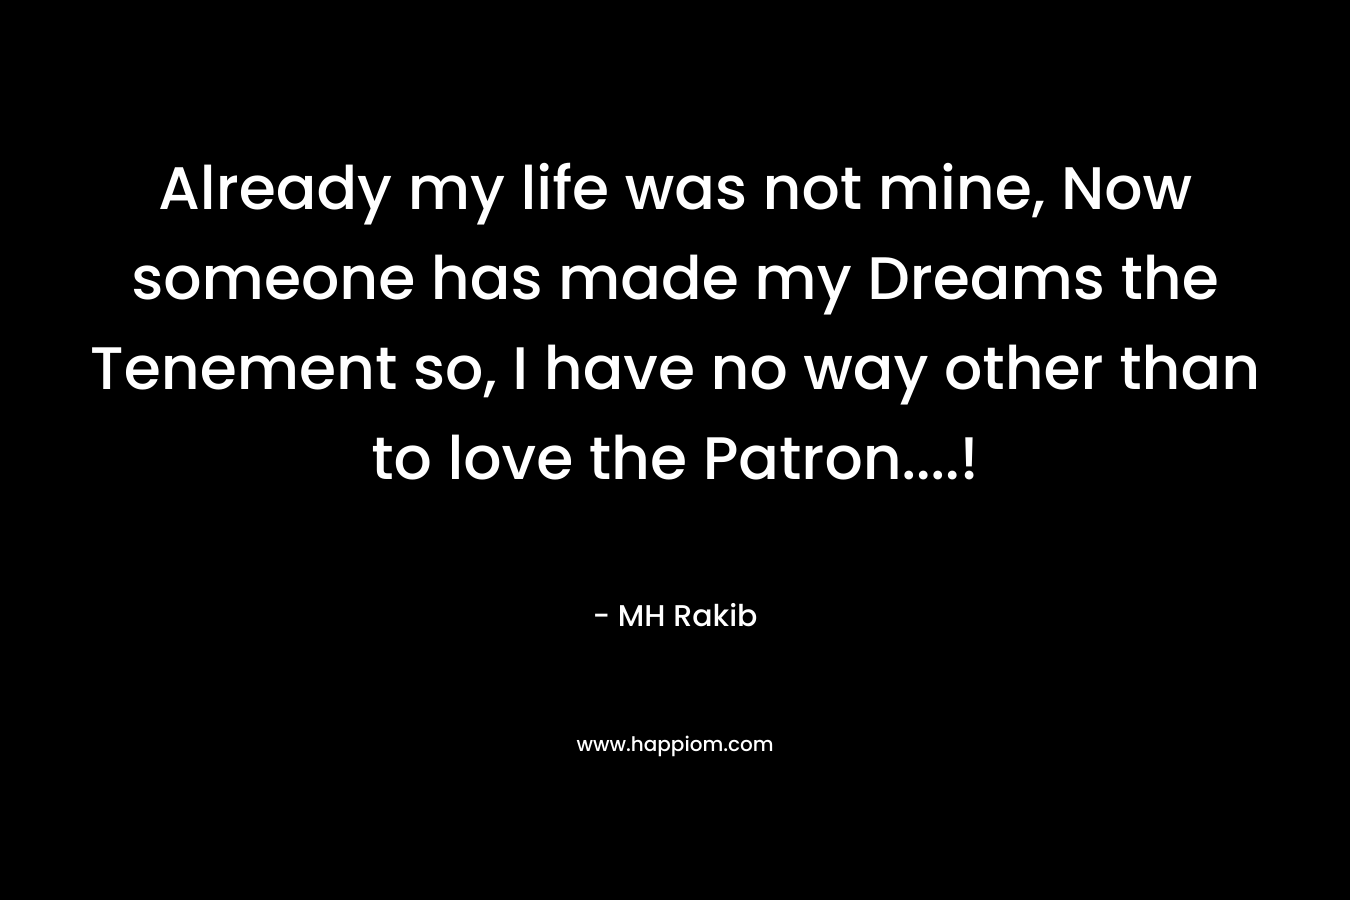 Already my life was not mine, Now someone has made my Dreams the Tenement so, I have no way other than to love the Patron….! – MH Rakib